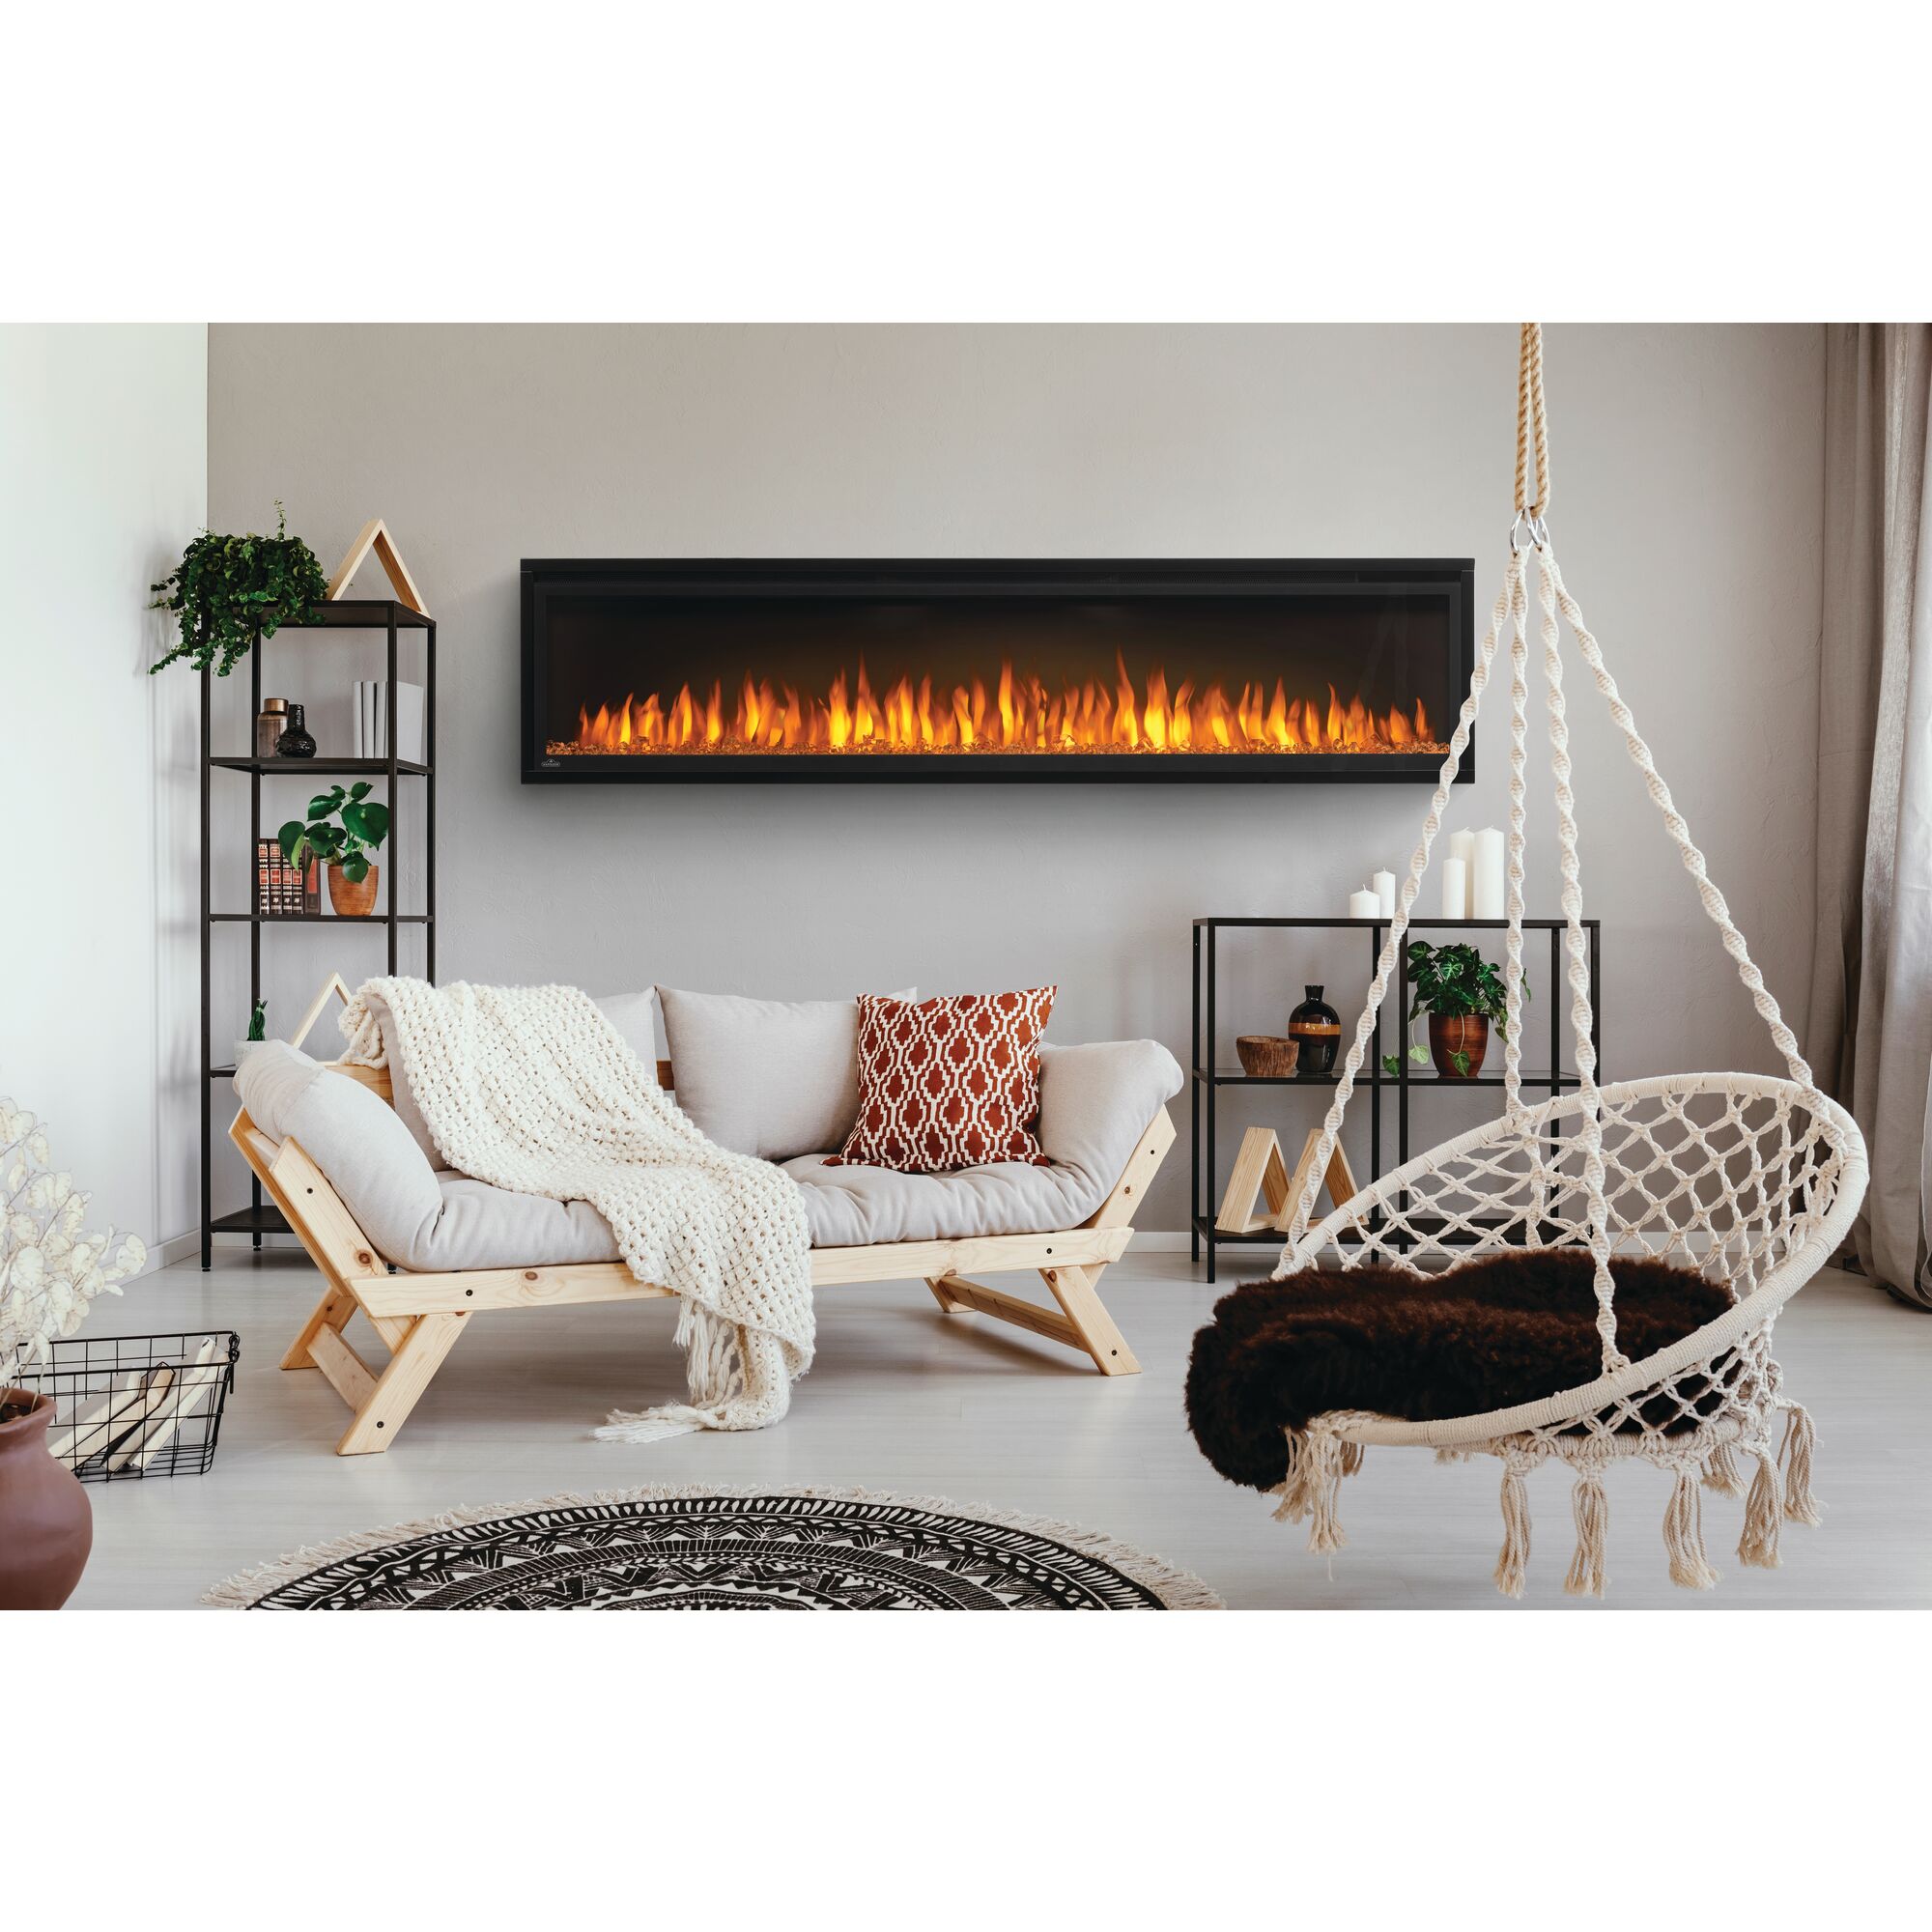 Image Napoleon Entice 60 inches eletric fireplace                                                                                                           